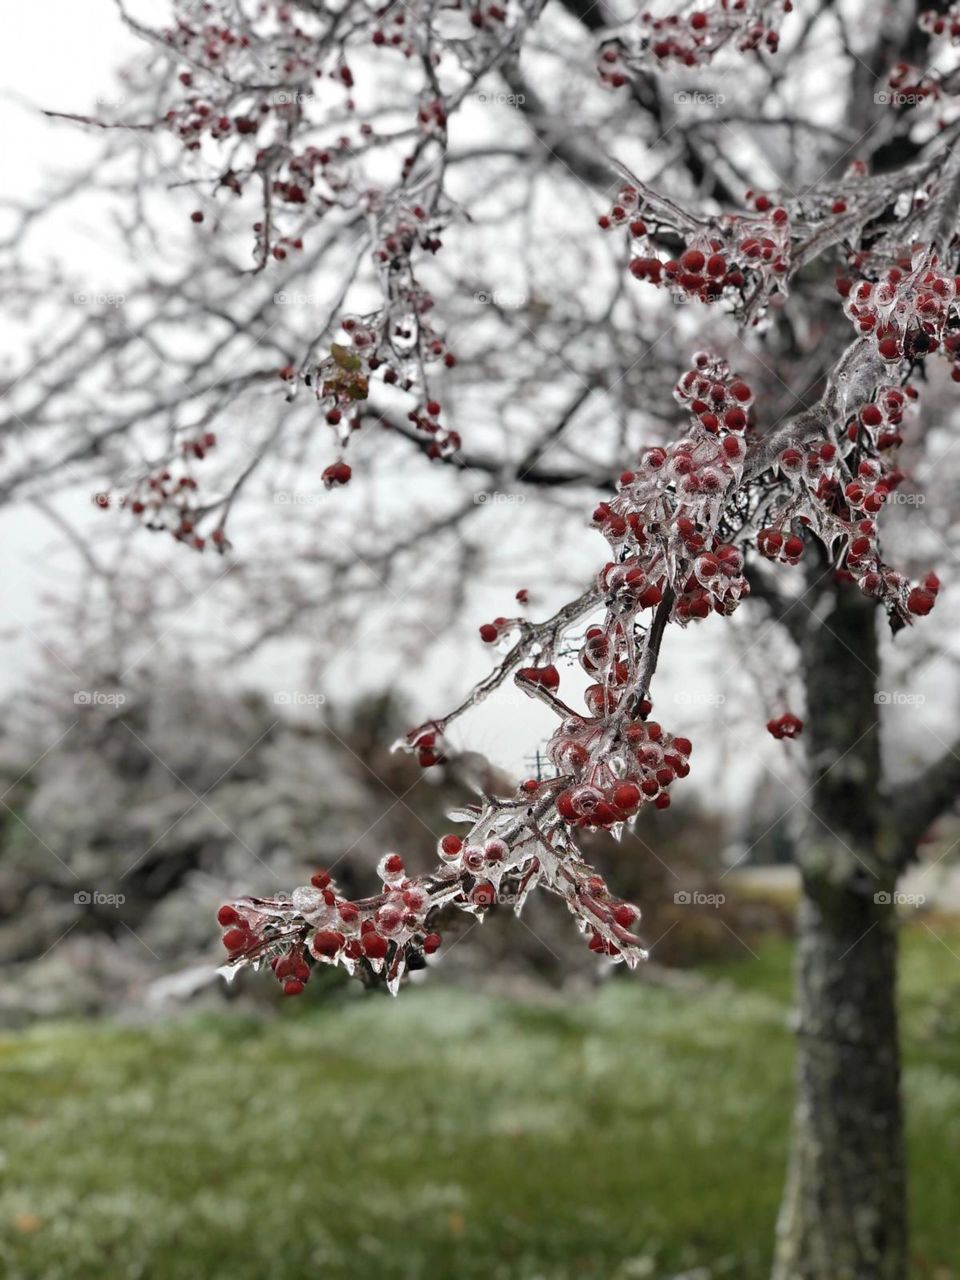 Icing rain and frozen tree with red berries 